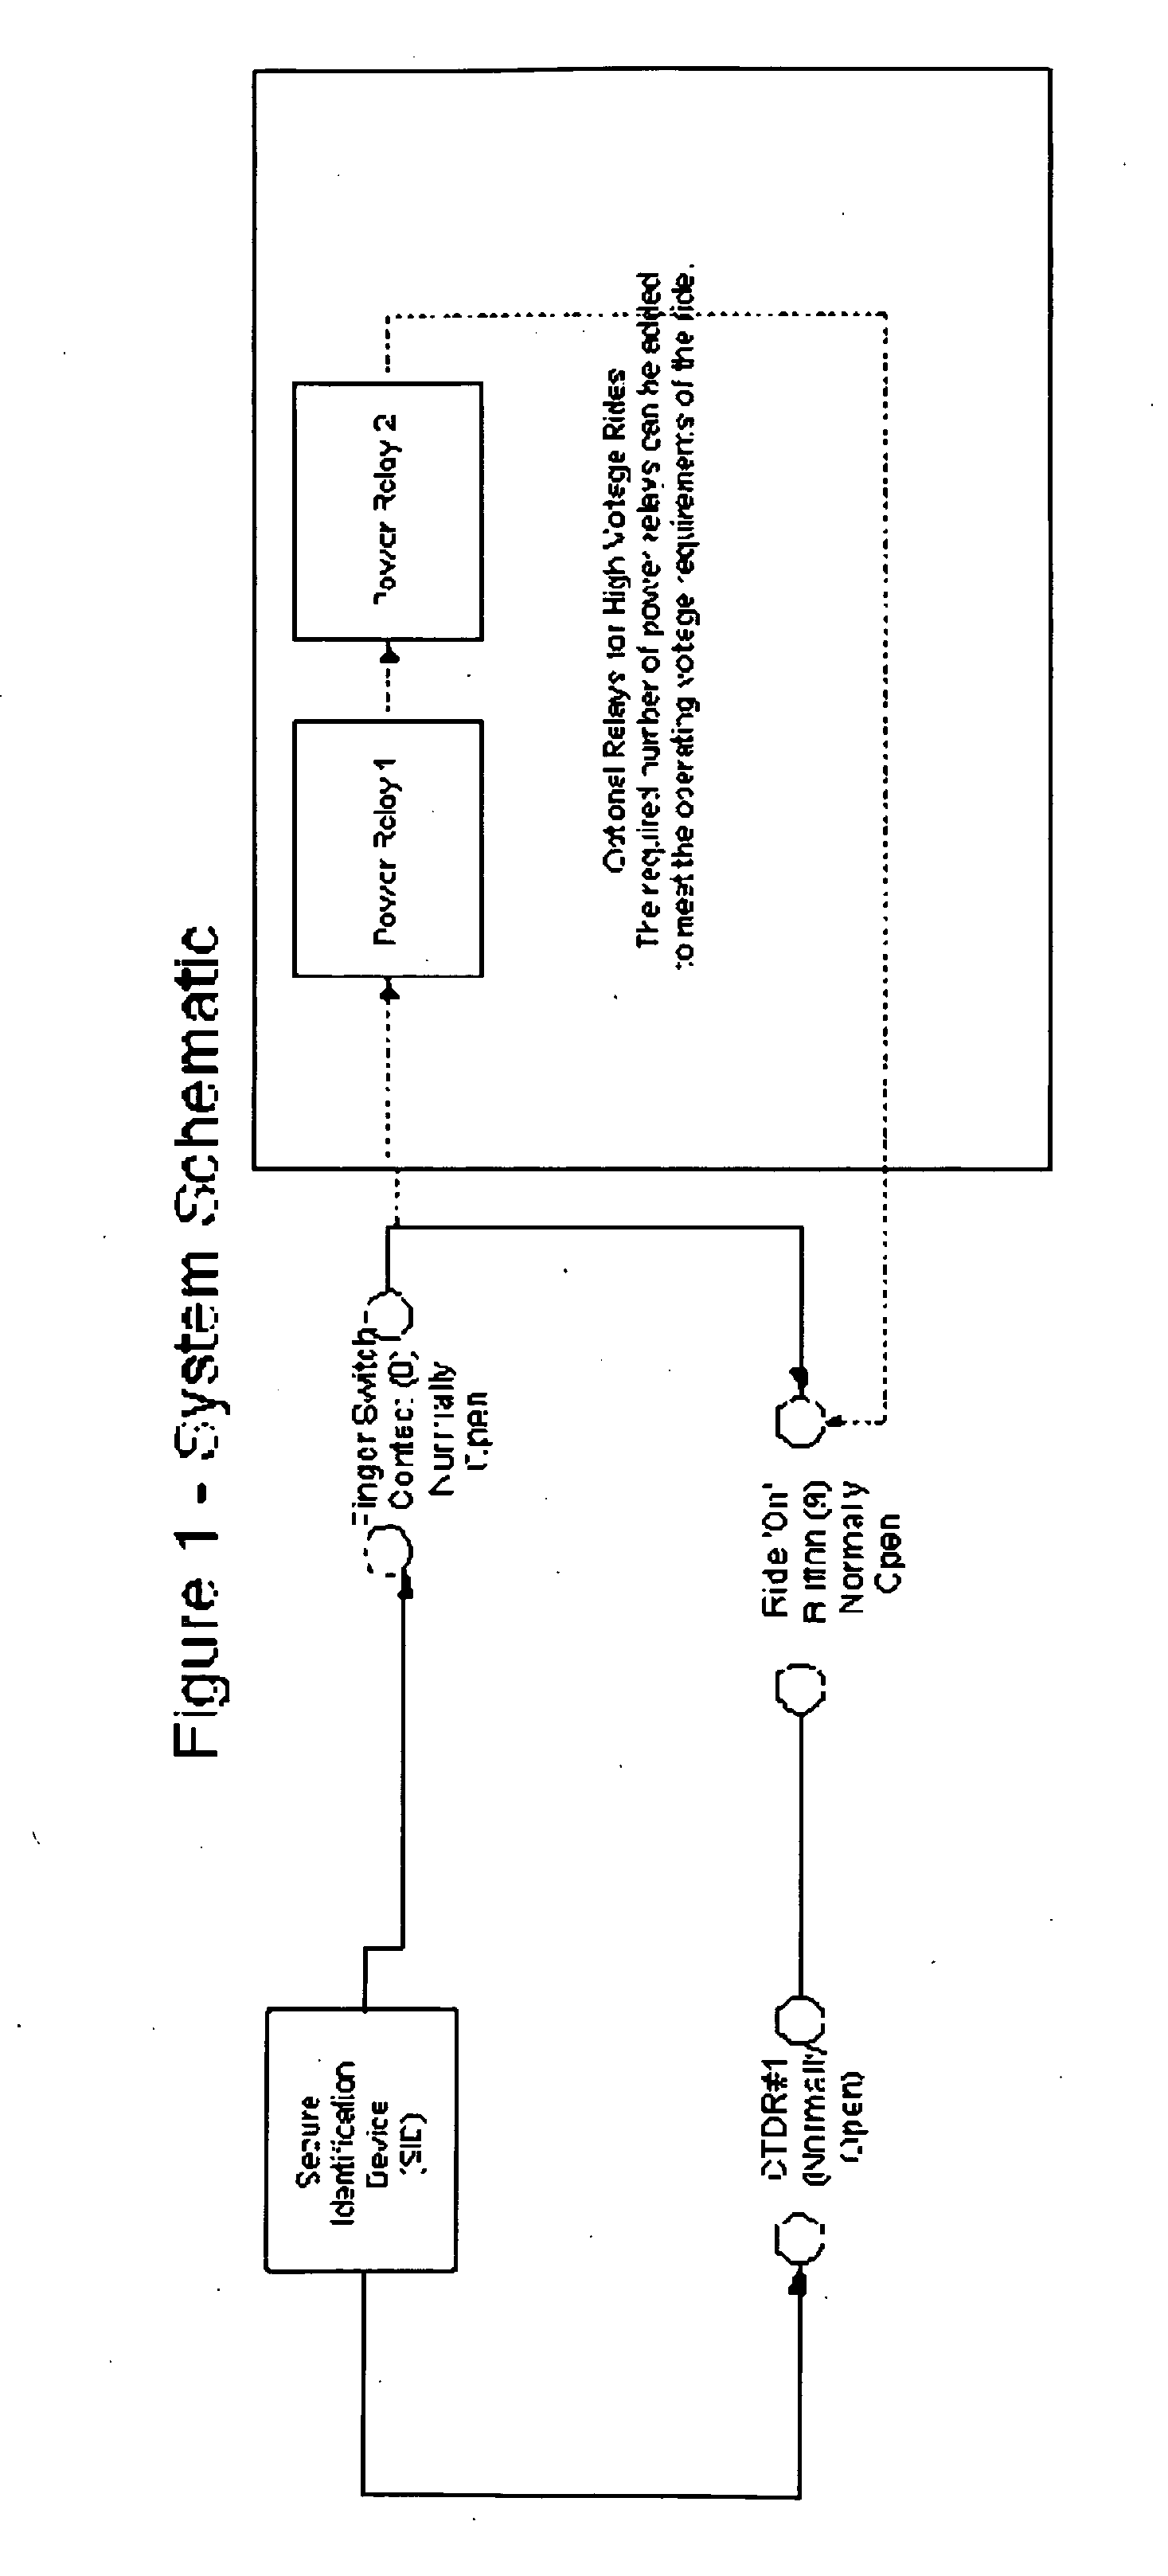 Secure Identification Device for Verifying Operator Identity